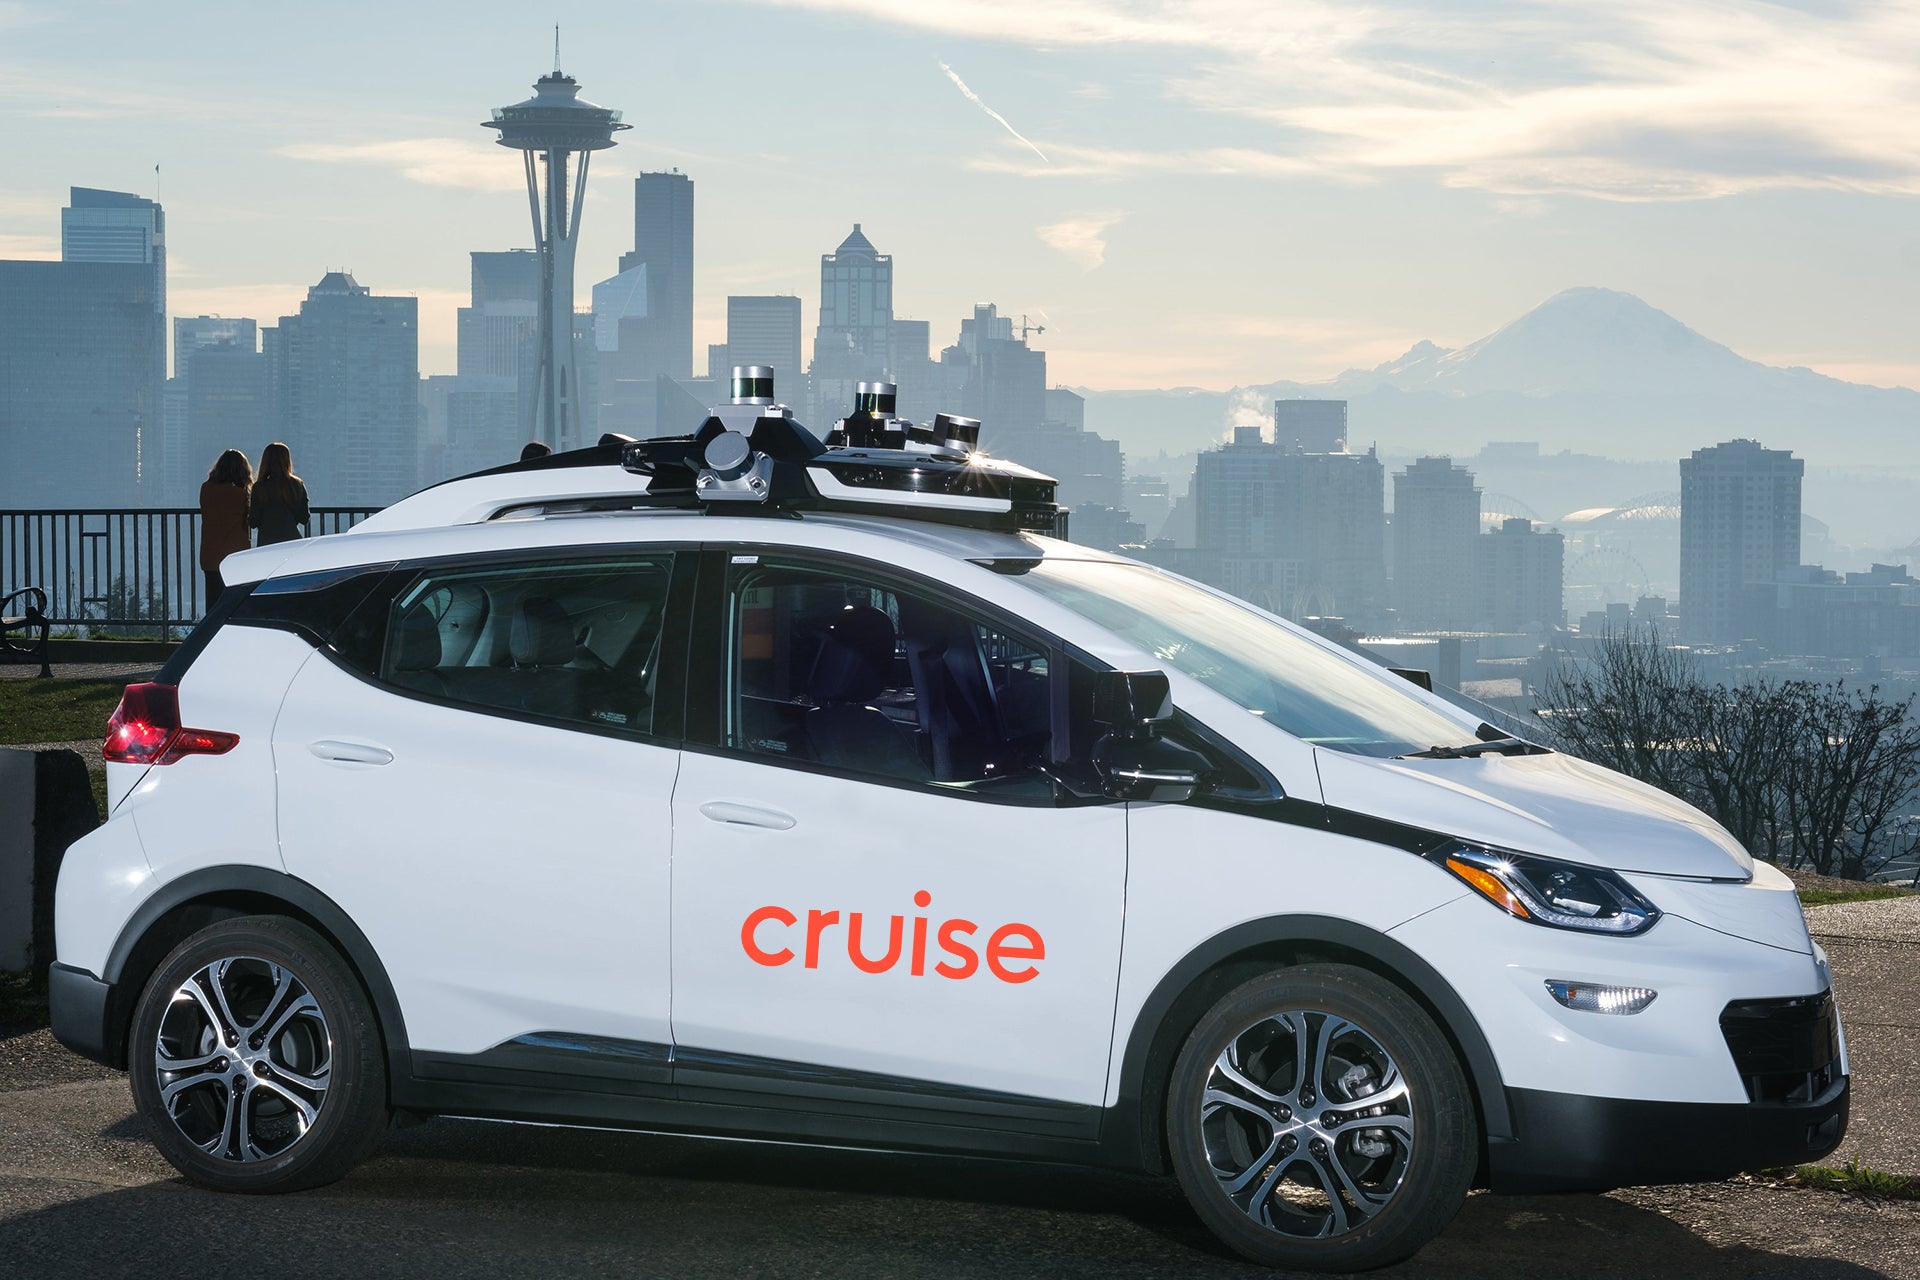 A quick guide to what’s going on with self-driving cars